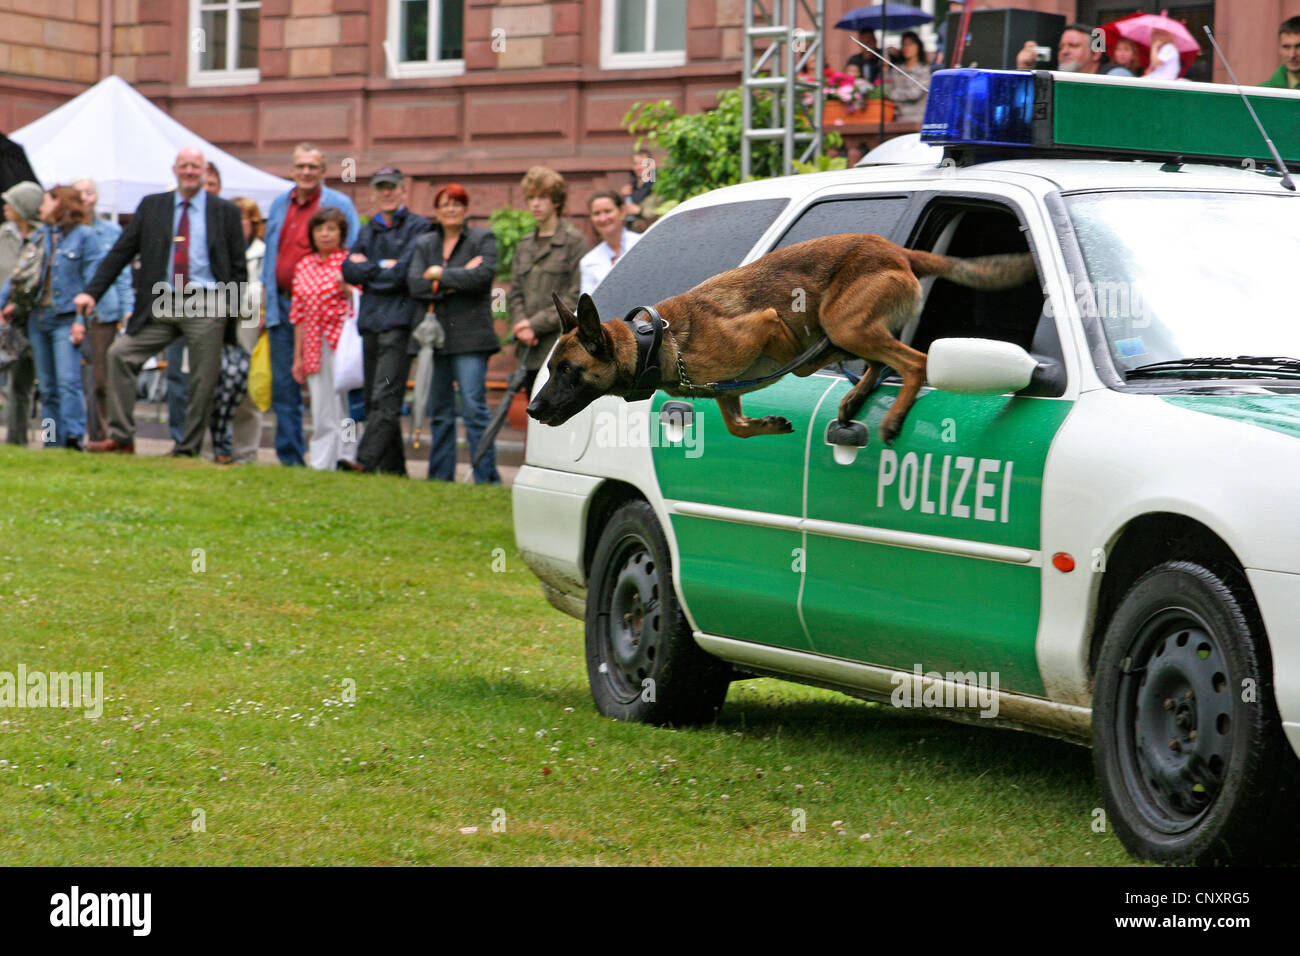 Malinois (Canis lupus f. familiaris), police dog jumping out of a police car at a public demonstration in a park Stock Photo